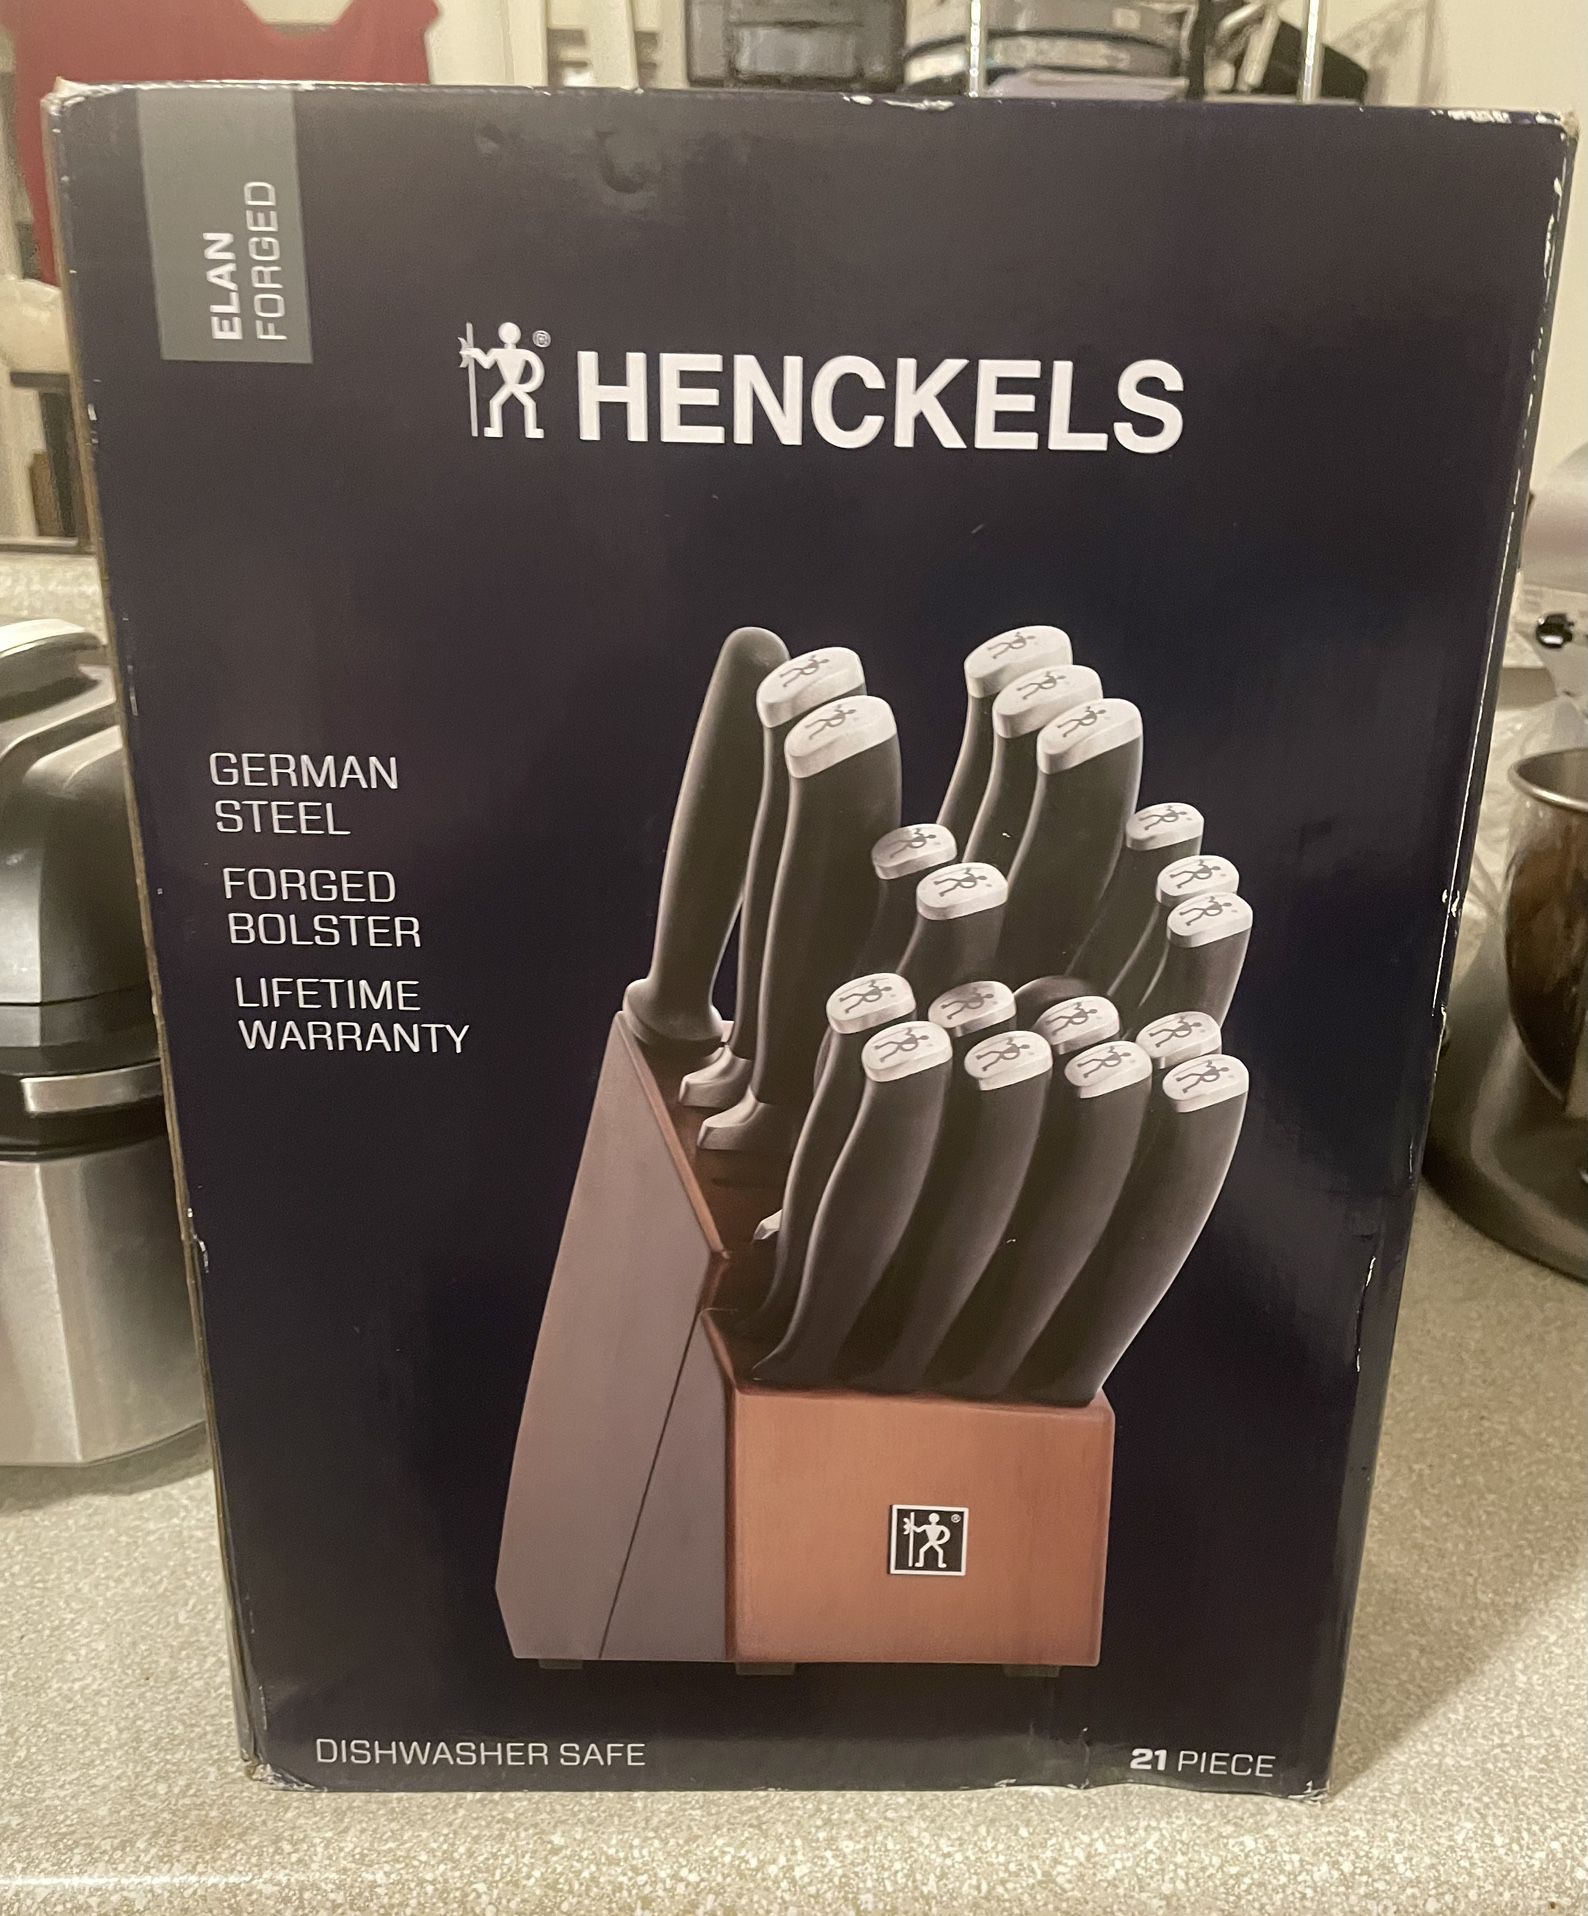 Henckels International, Elan Forged 14 Piece Set With Self-Sharpening Block;  Brand New Still In Box for Sale in Los Angeles, CA - OfferUp